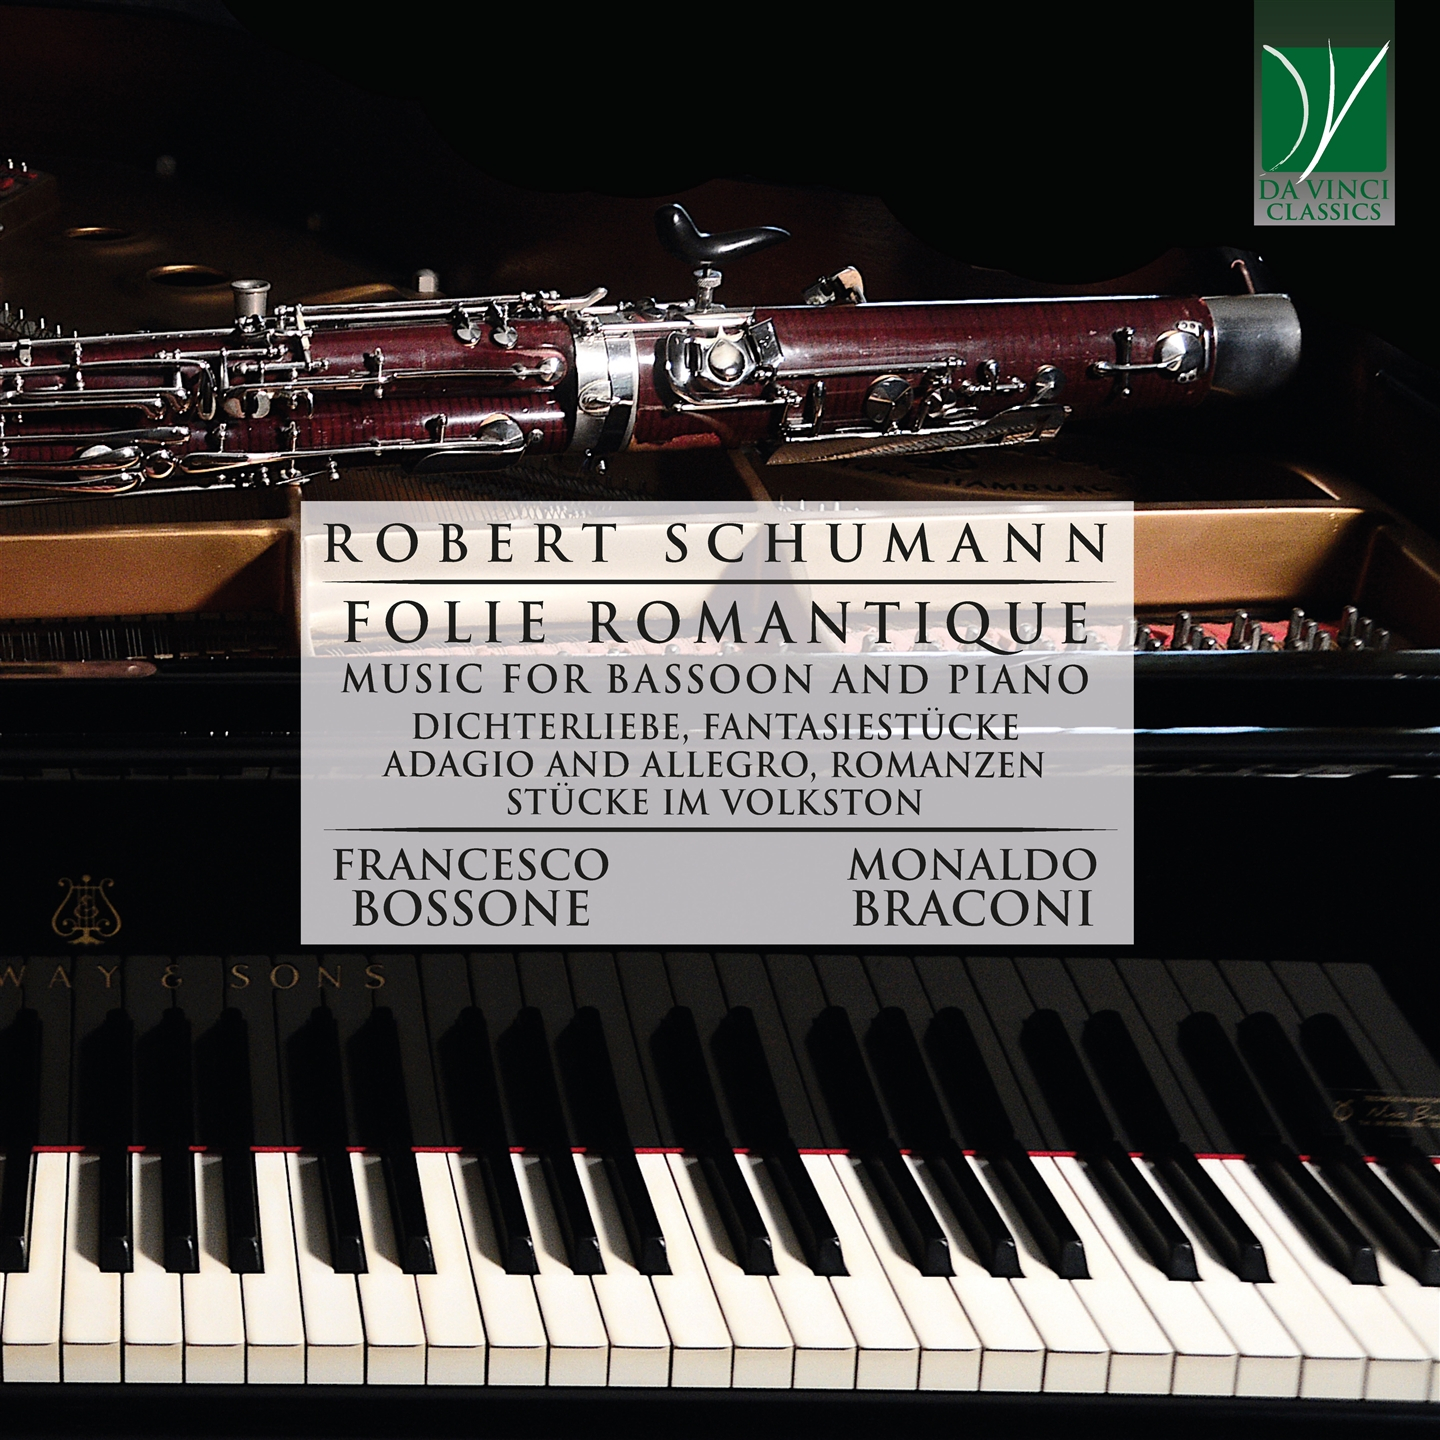 SCHUMANN: FOLIE ROMANTIQUE (MUSIC FOR BASSOON AND PIANO)